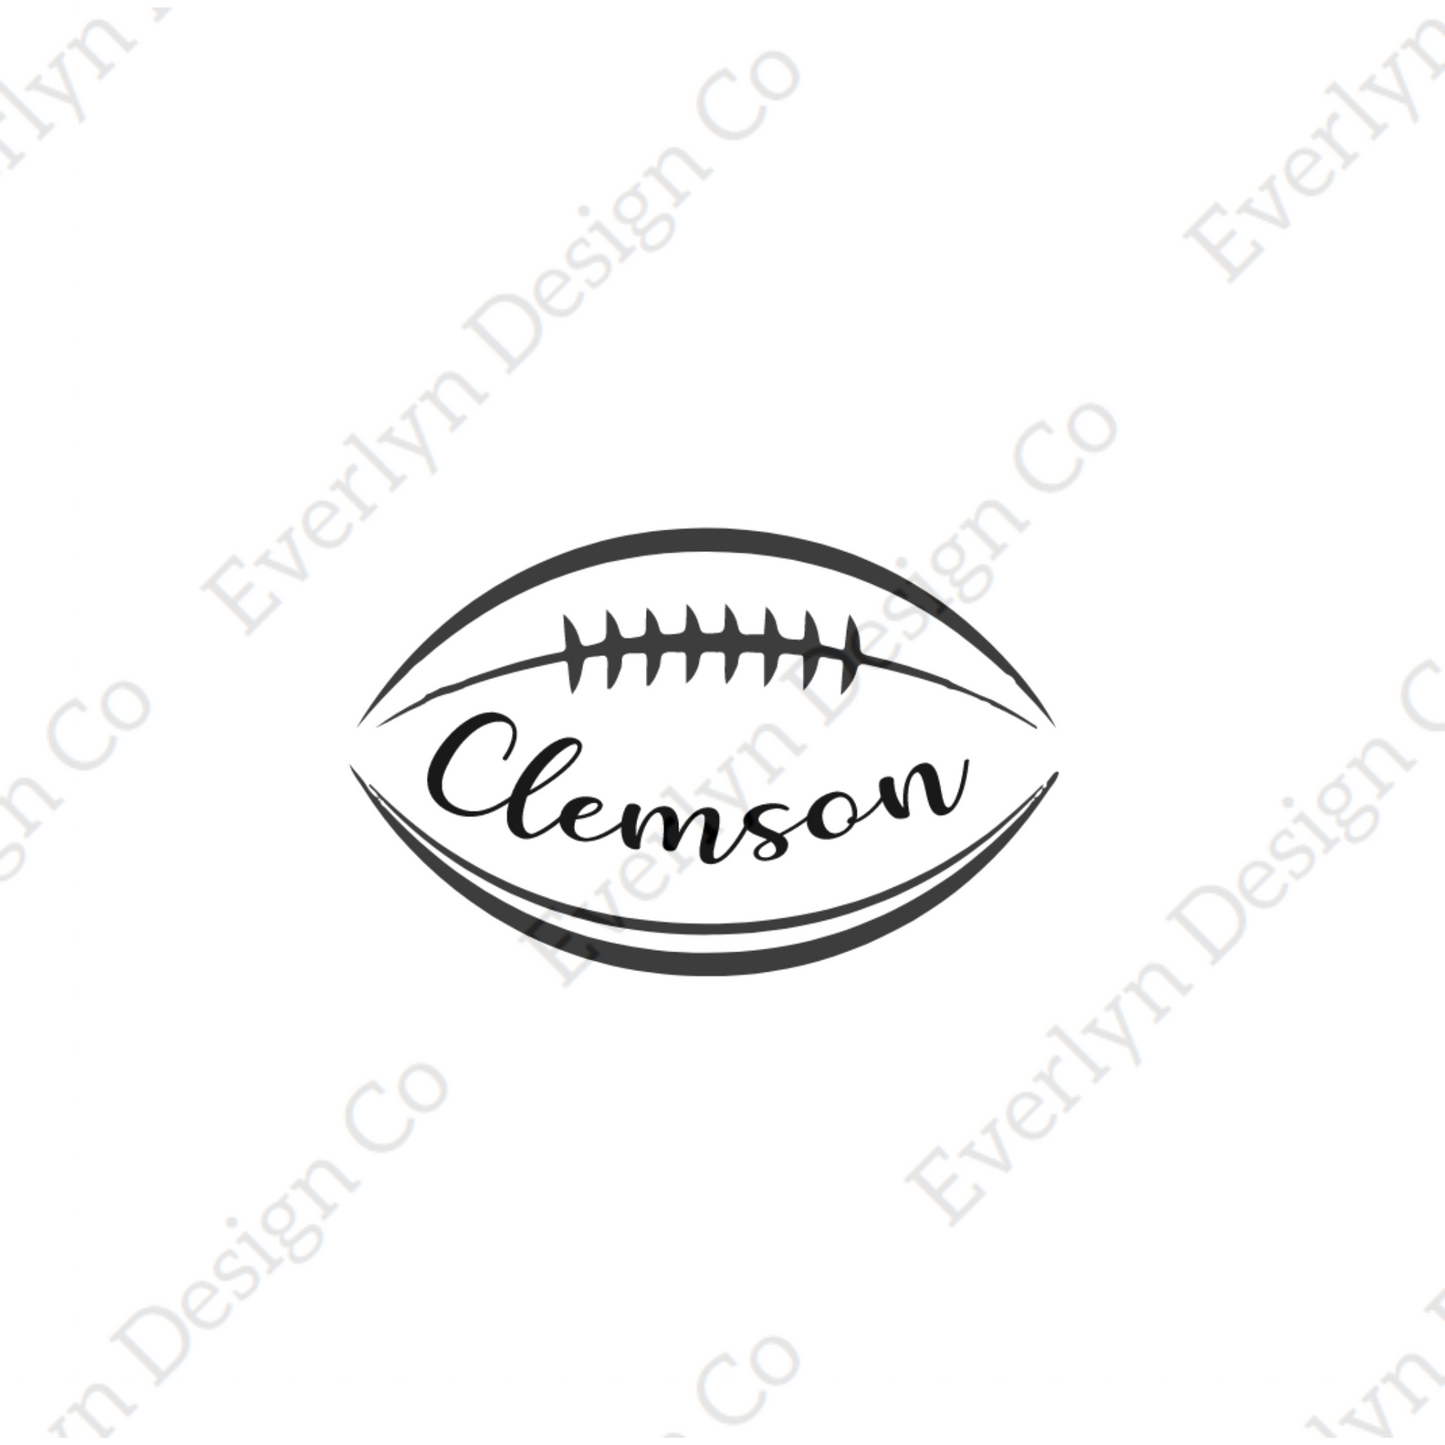 Clemson Football SVG File- Includes commercial license